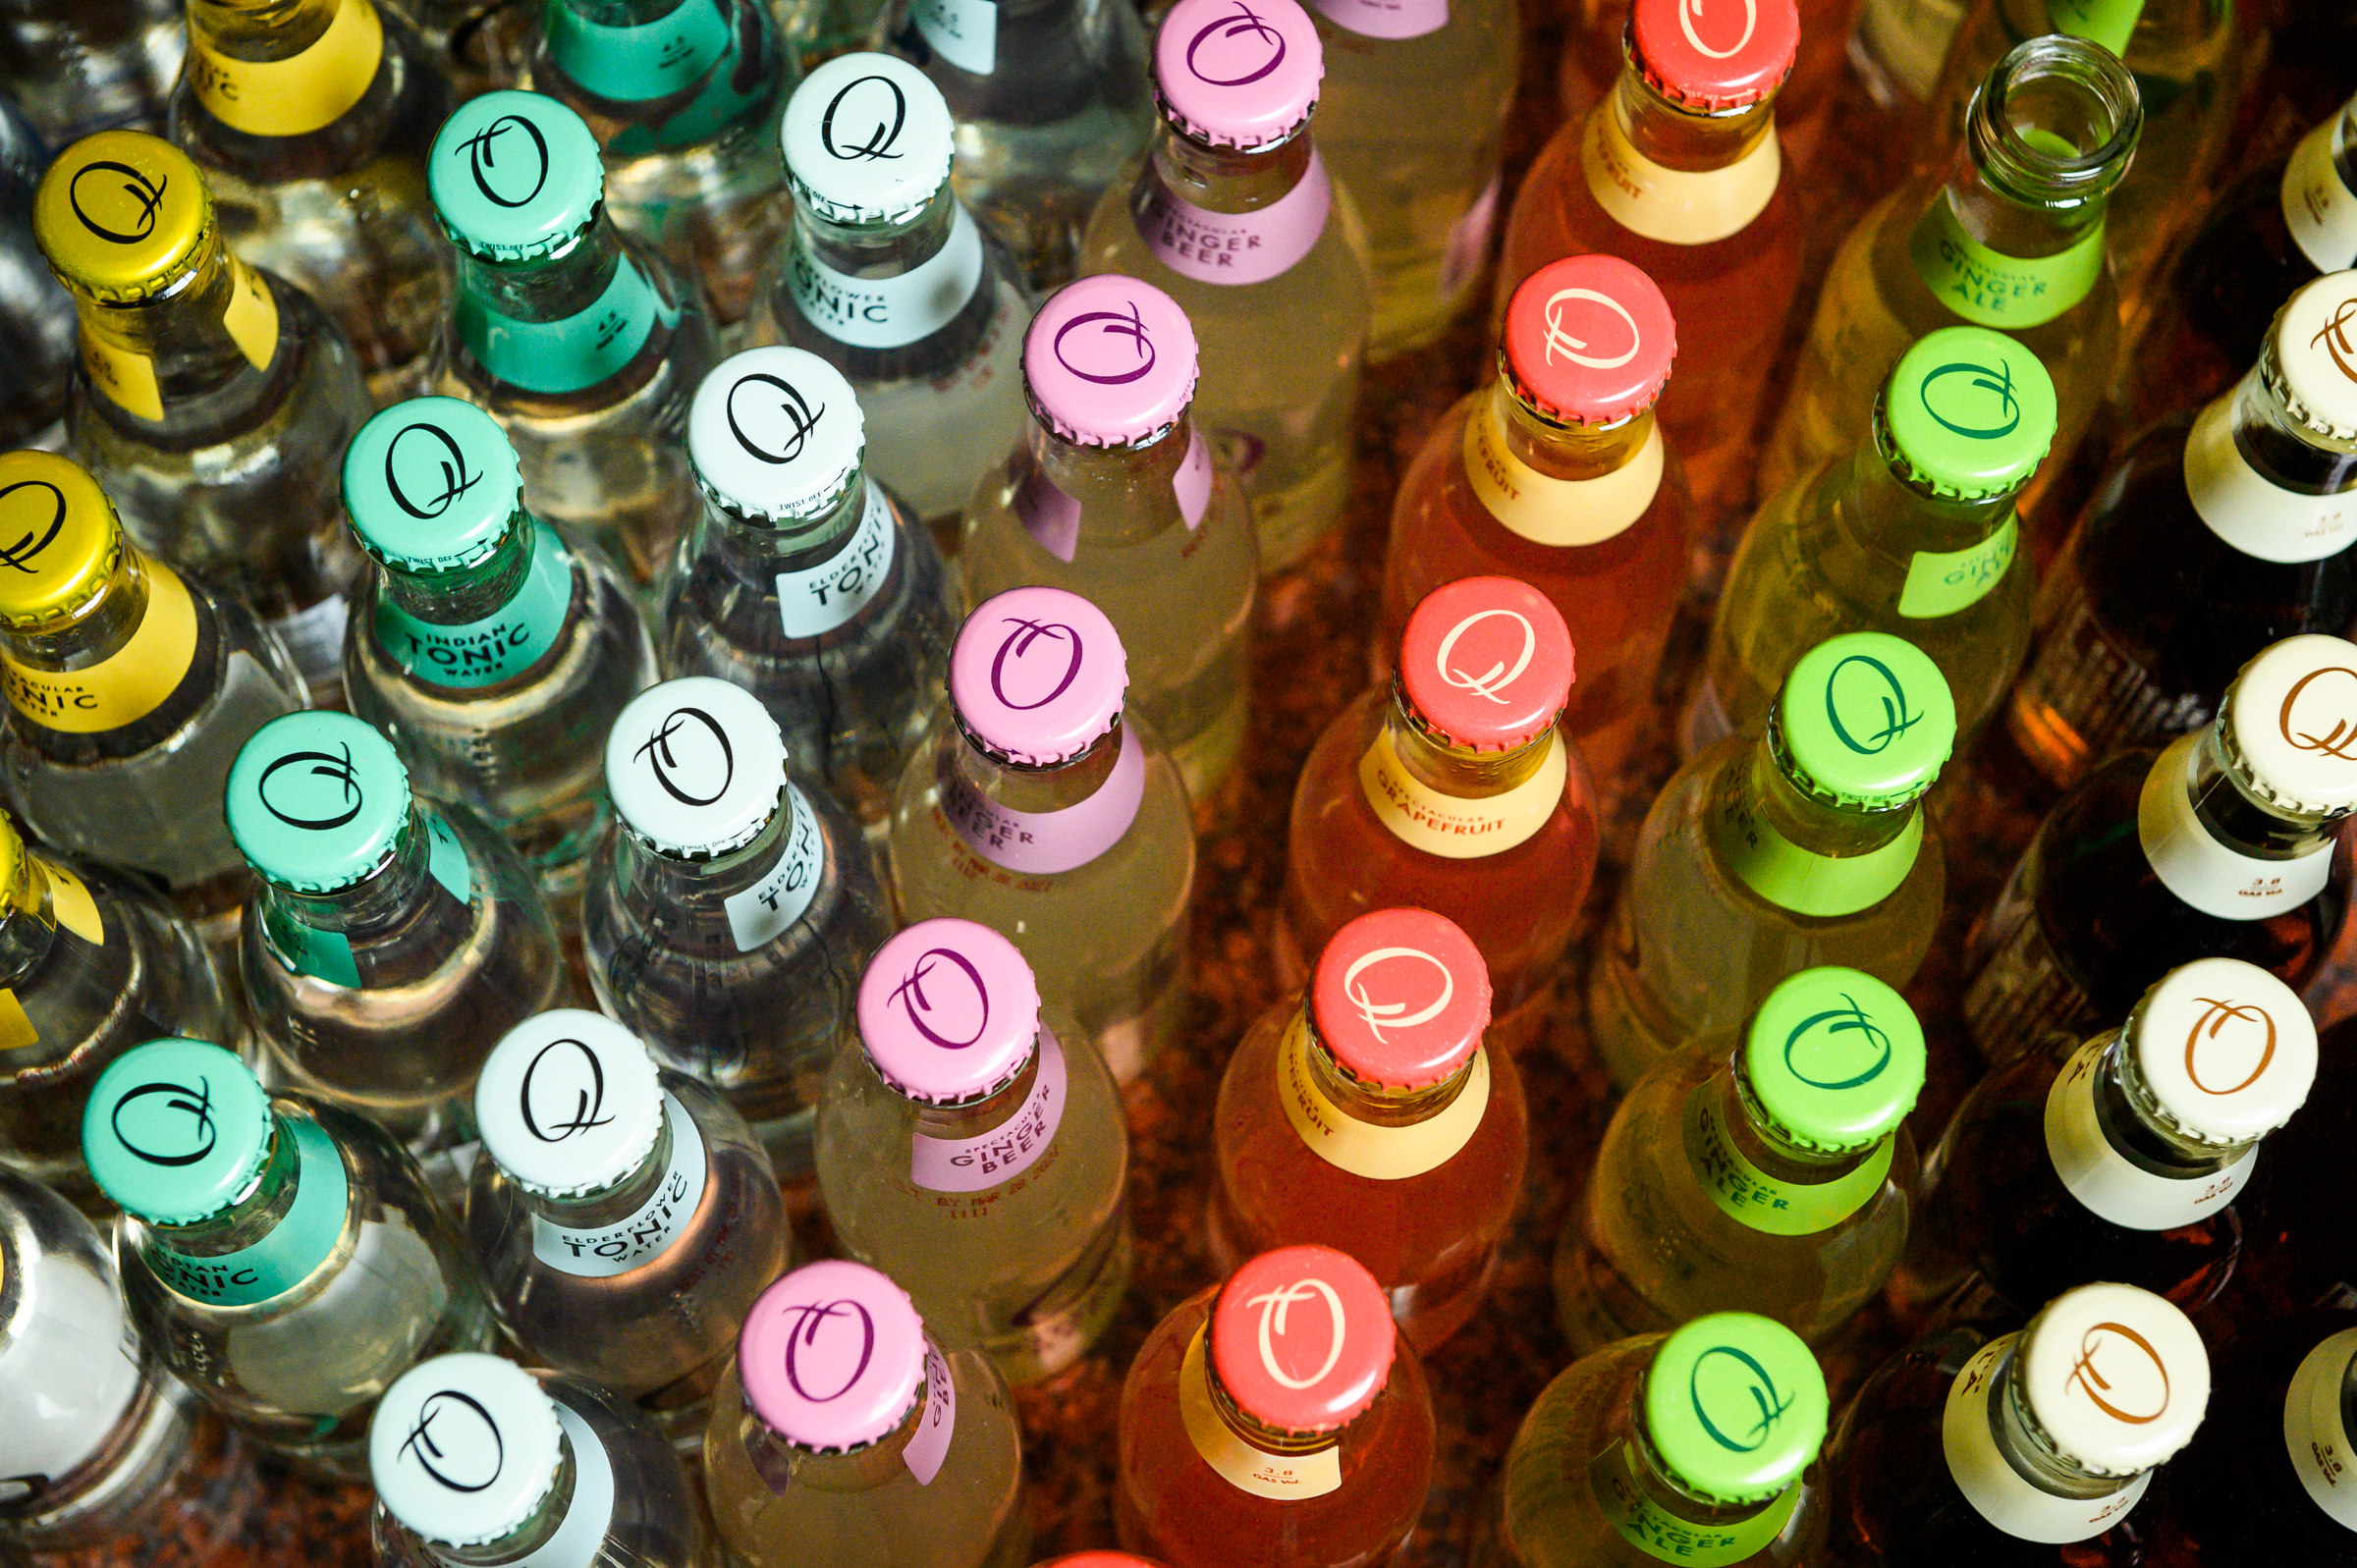 Lineup of bottle tops from Q Mixers products